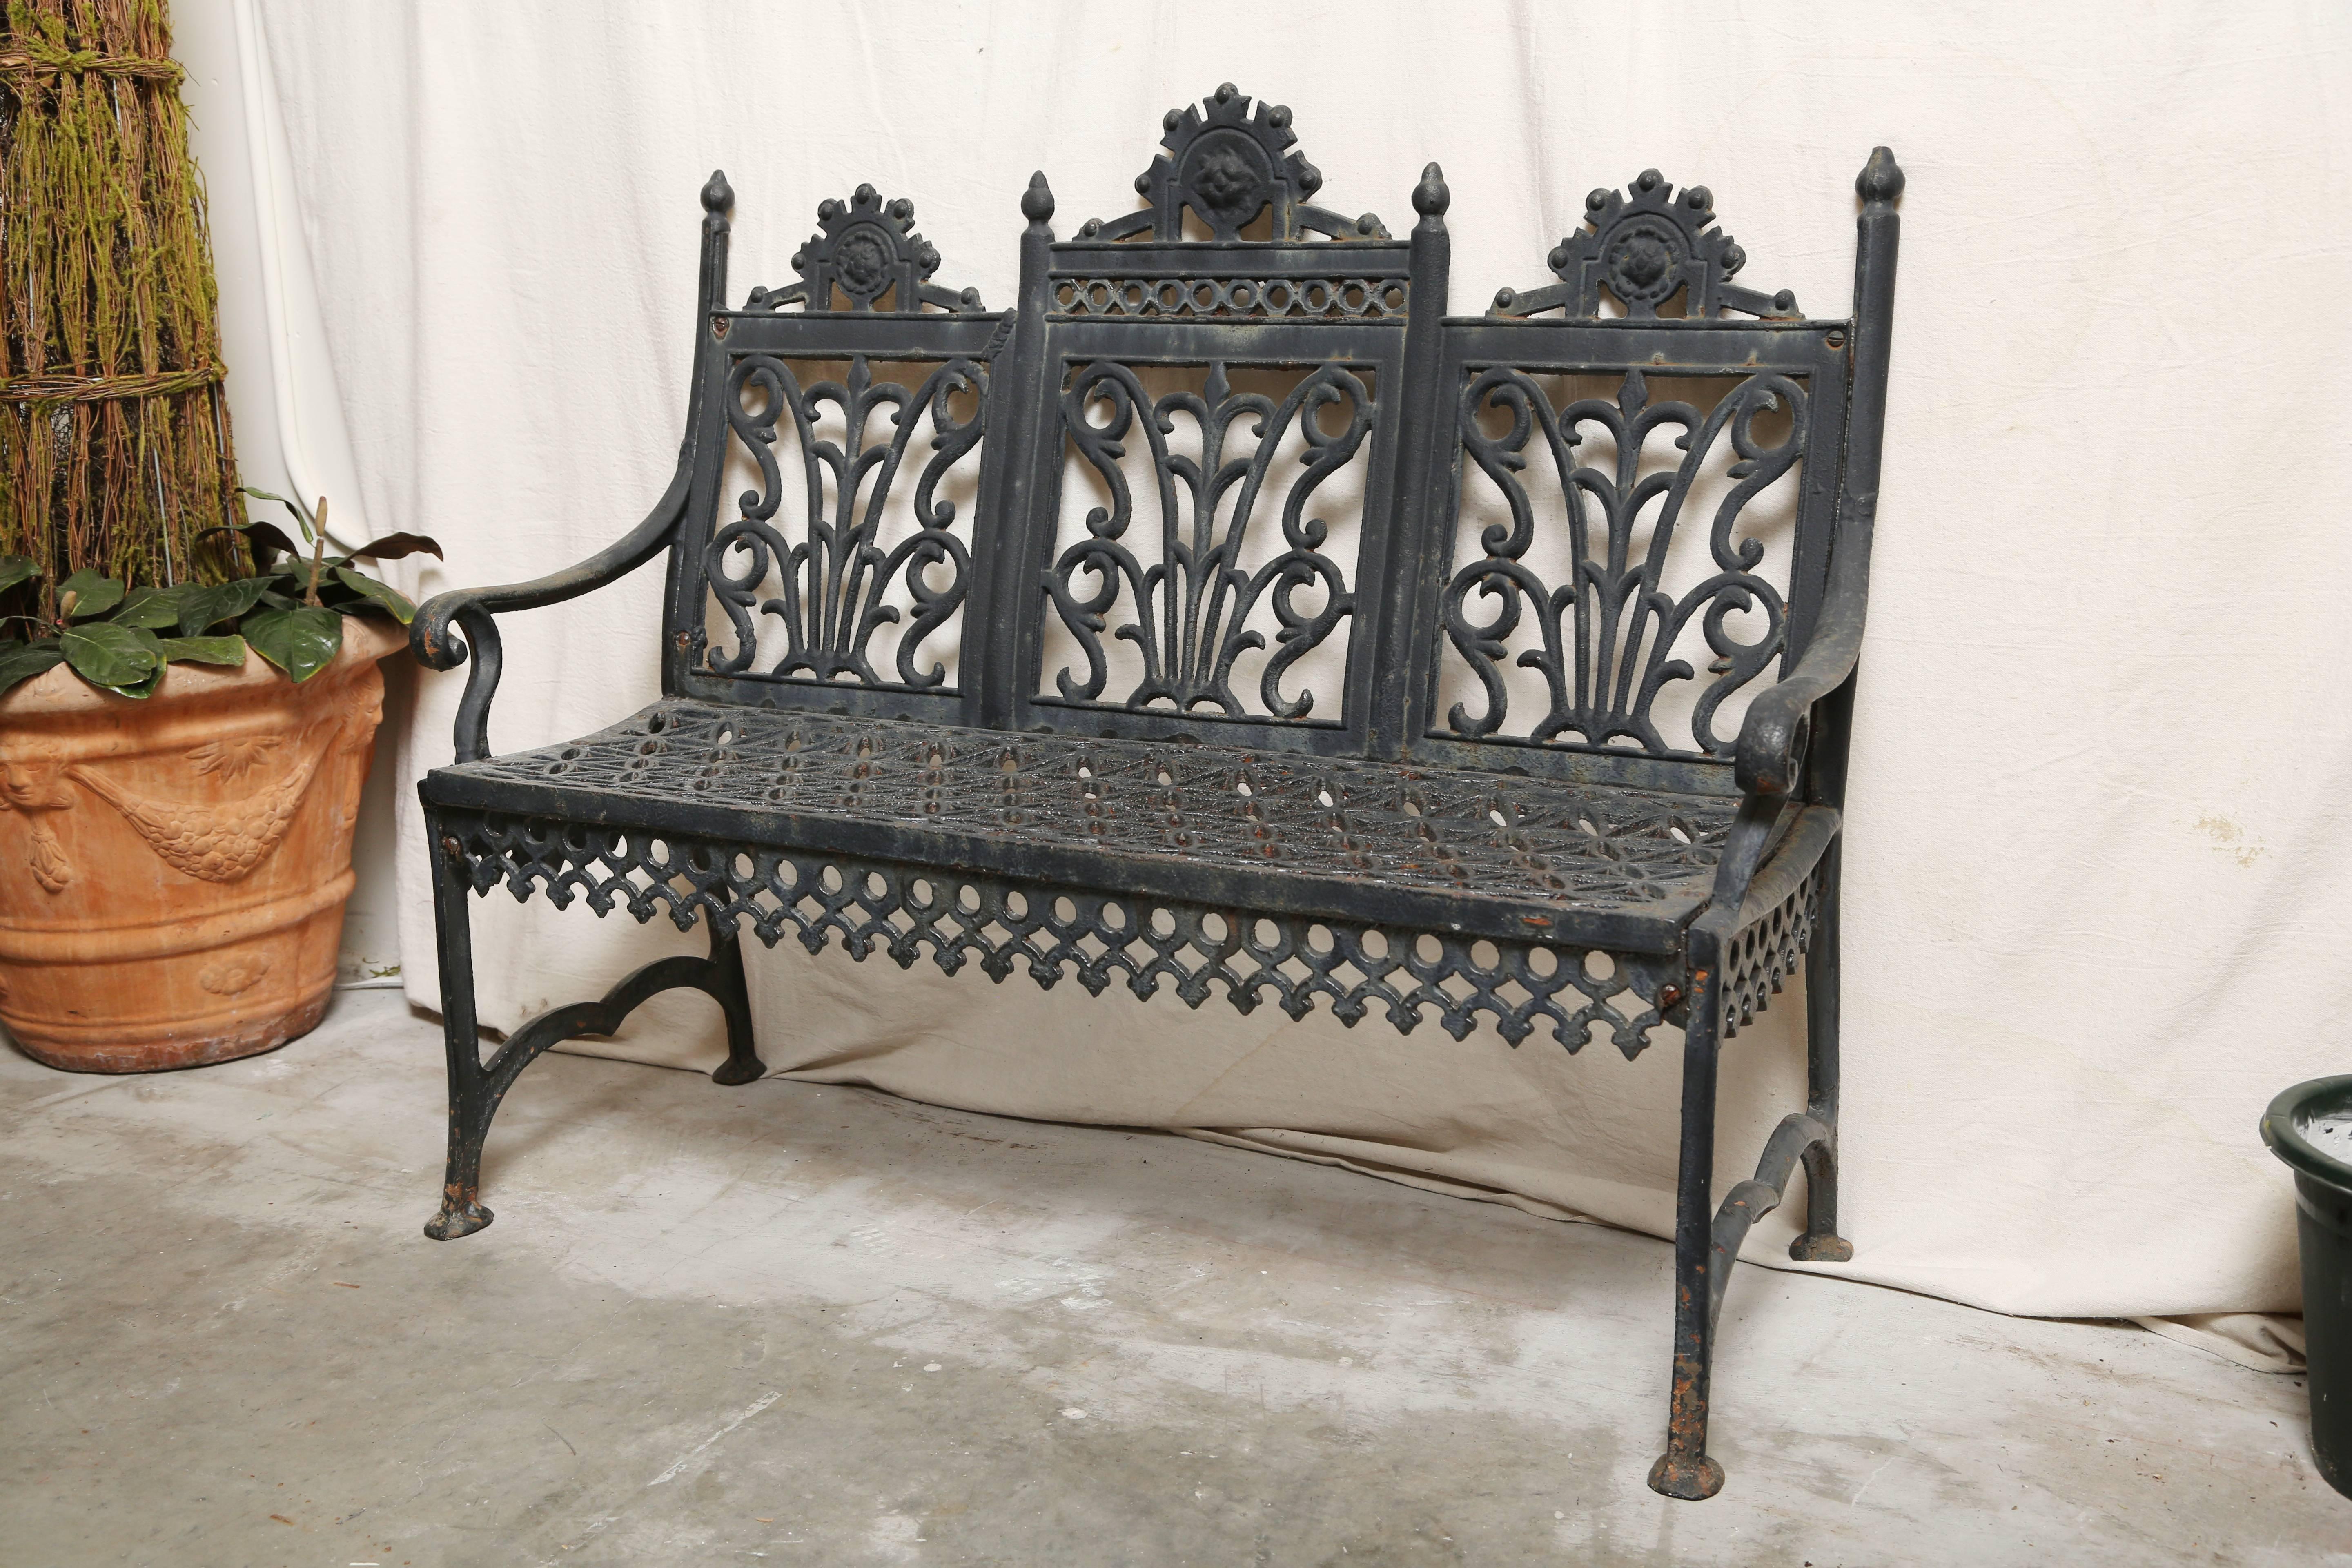 Child's 19th century Victorian cast iron two armed bench. Seats two adults comfortably.  It is referred to as a curtain design garden settee by the Philadelphia foundry  Brines, Chase and Company who worked from 1880-95.
Measures: Seat height 15